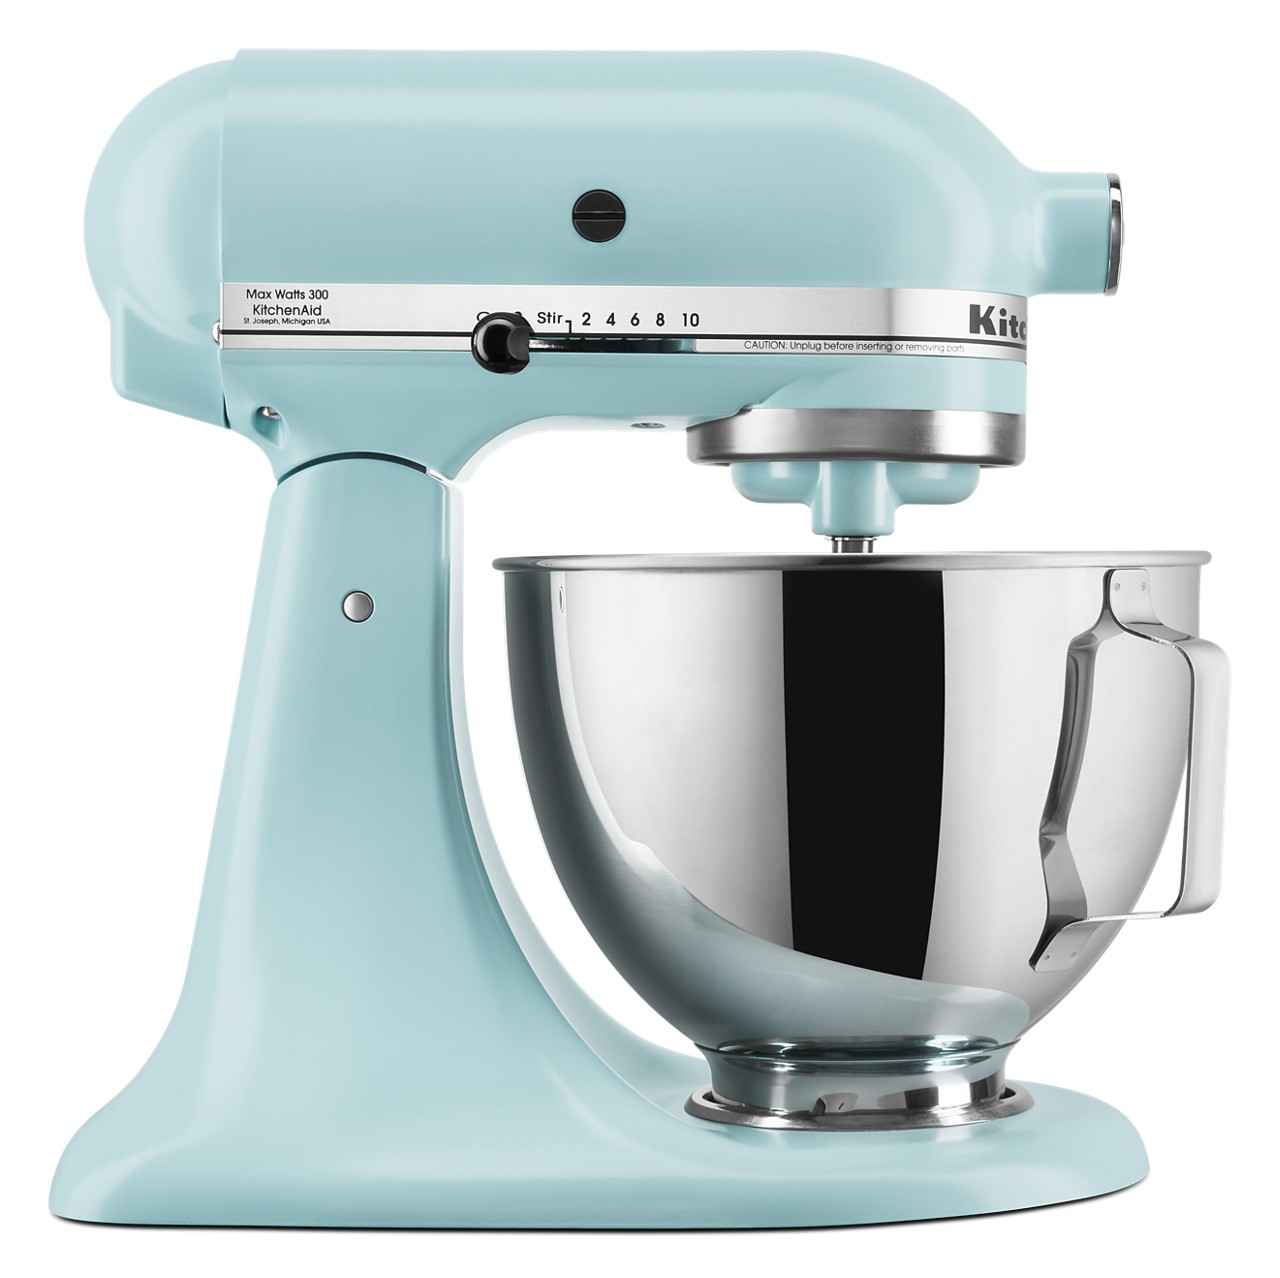 KitchenAid® Deluxe 4.5 Quart Tilt-Head Stand Mixer, 	Mineral Water Blue, KSM97 - image 1 of 9